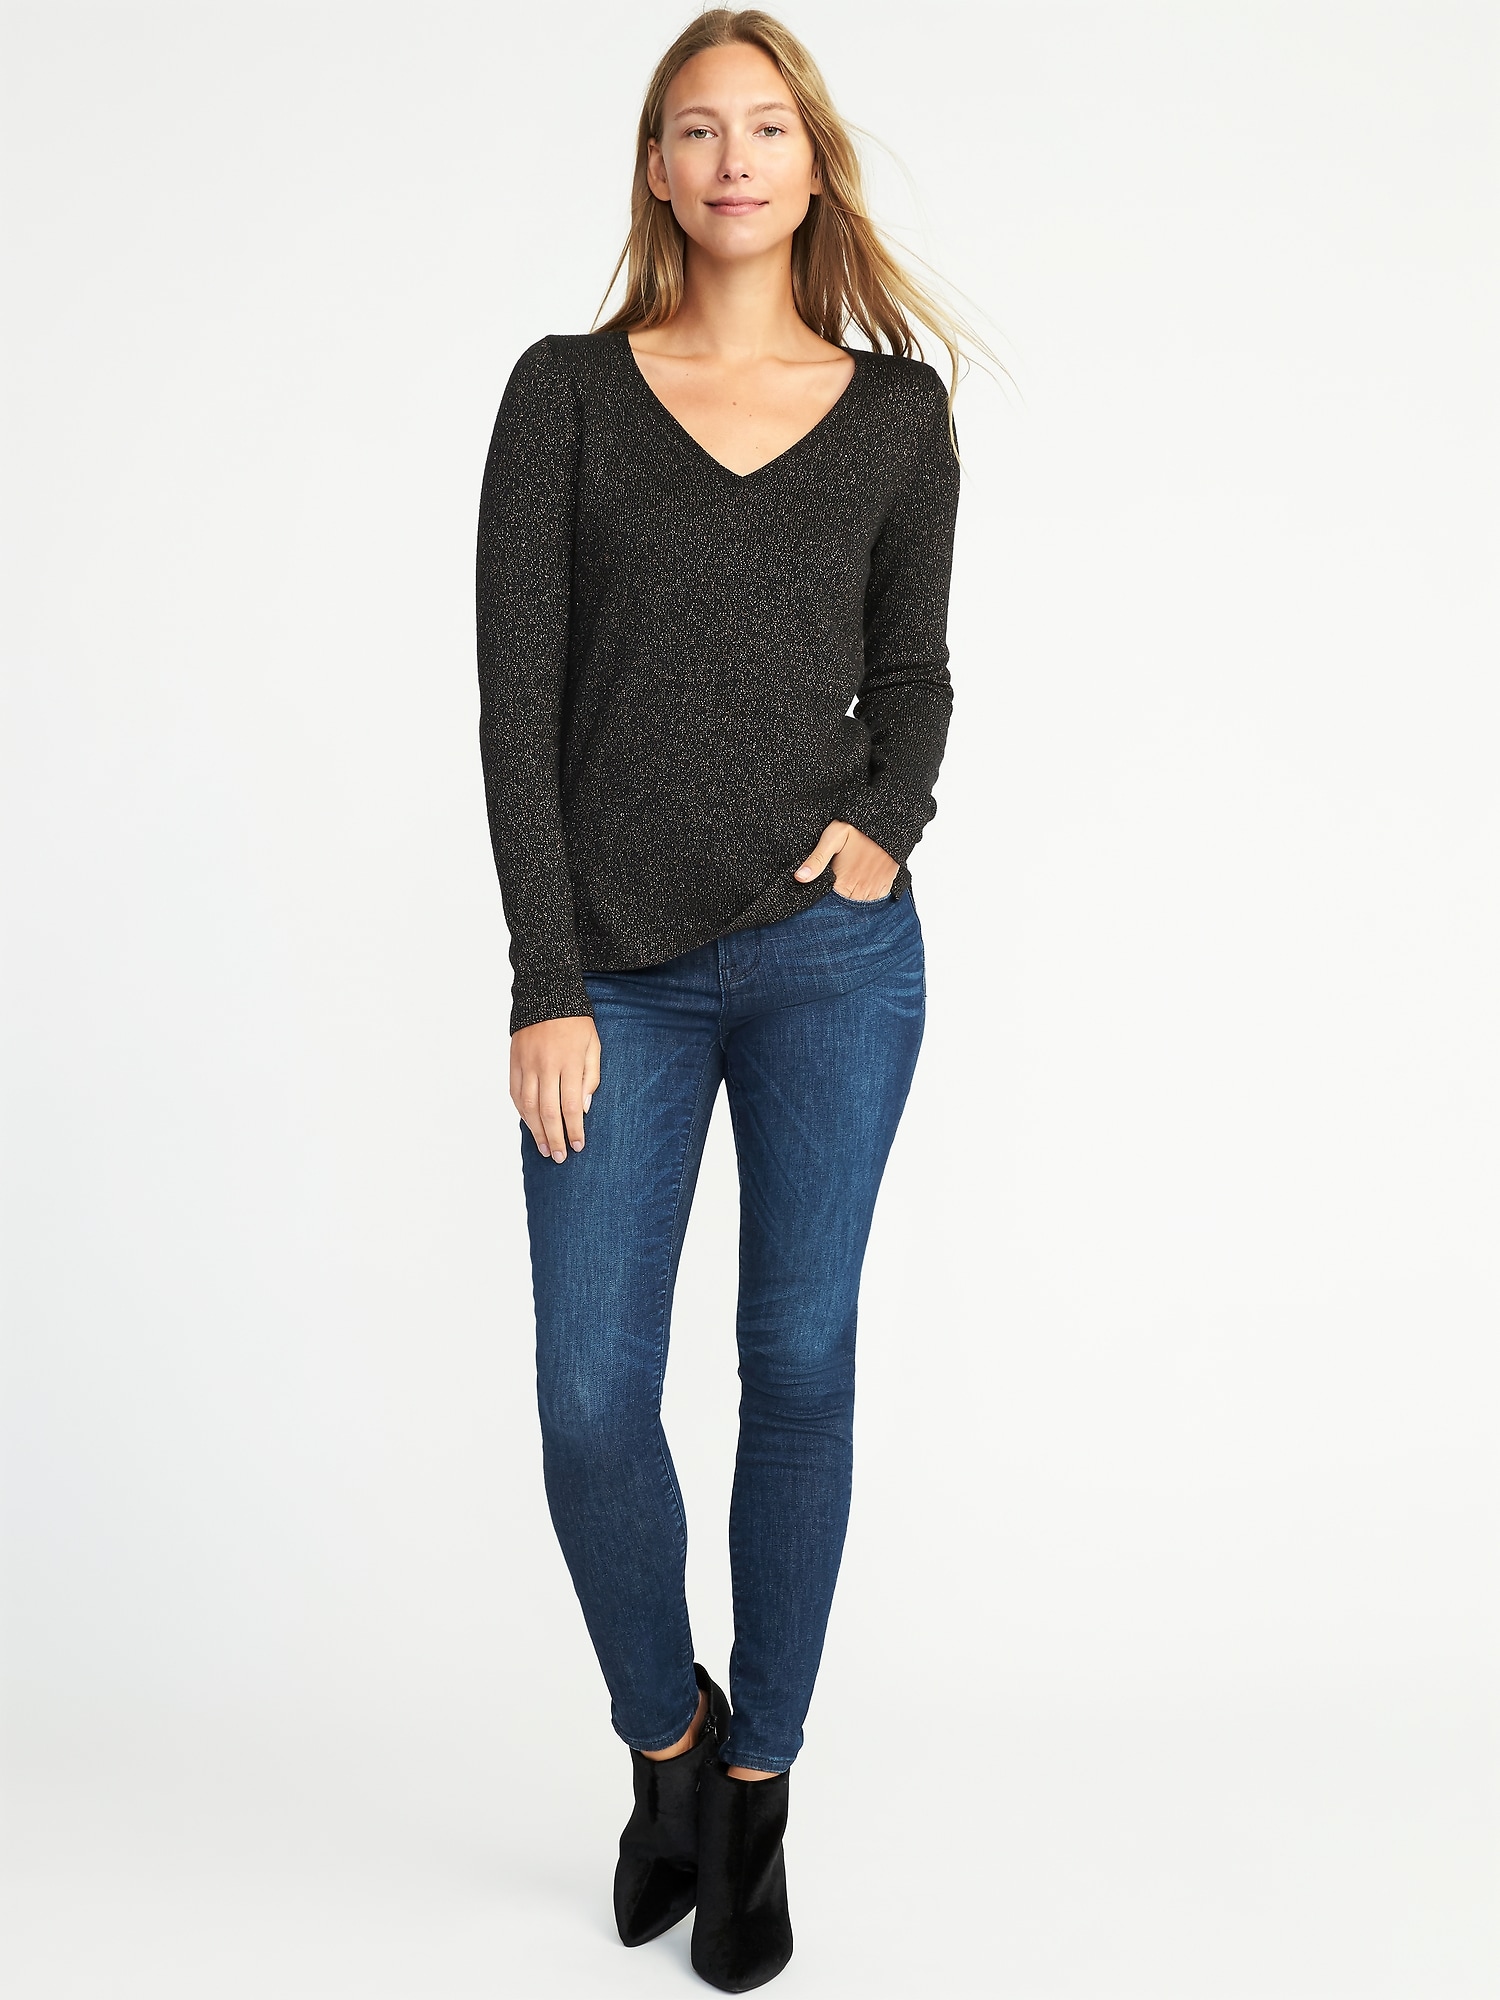 Classic Sparkle Sweater for Women | Old Navy